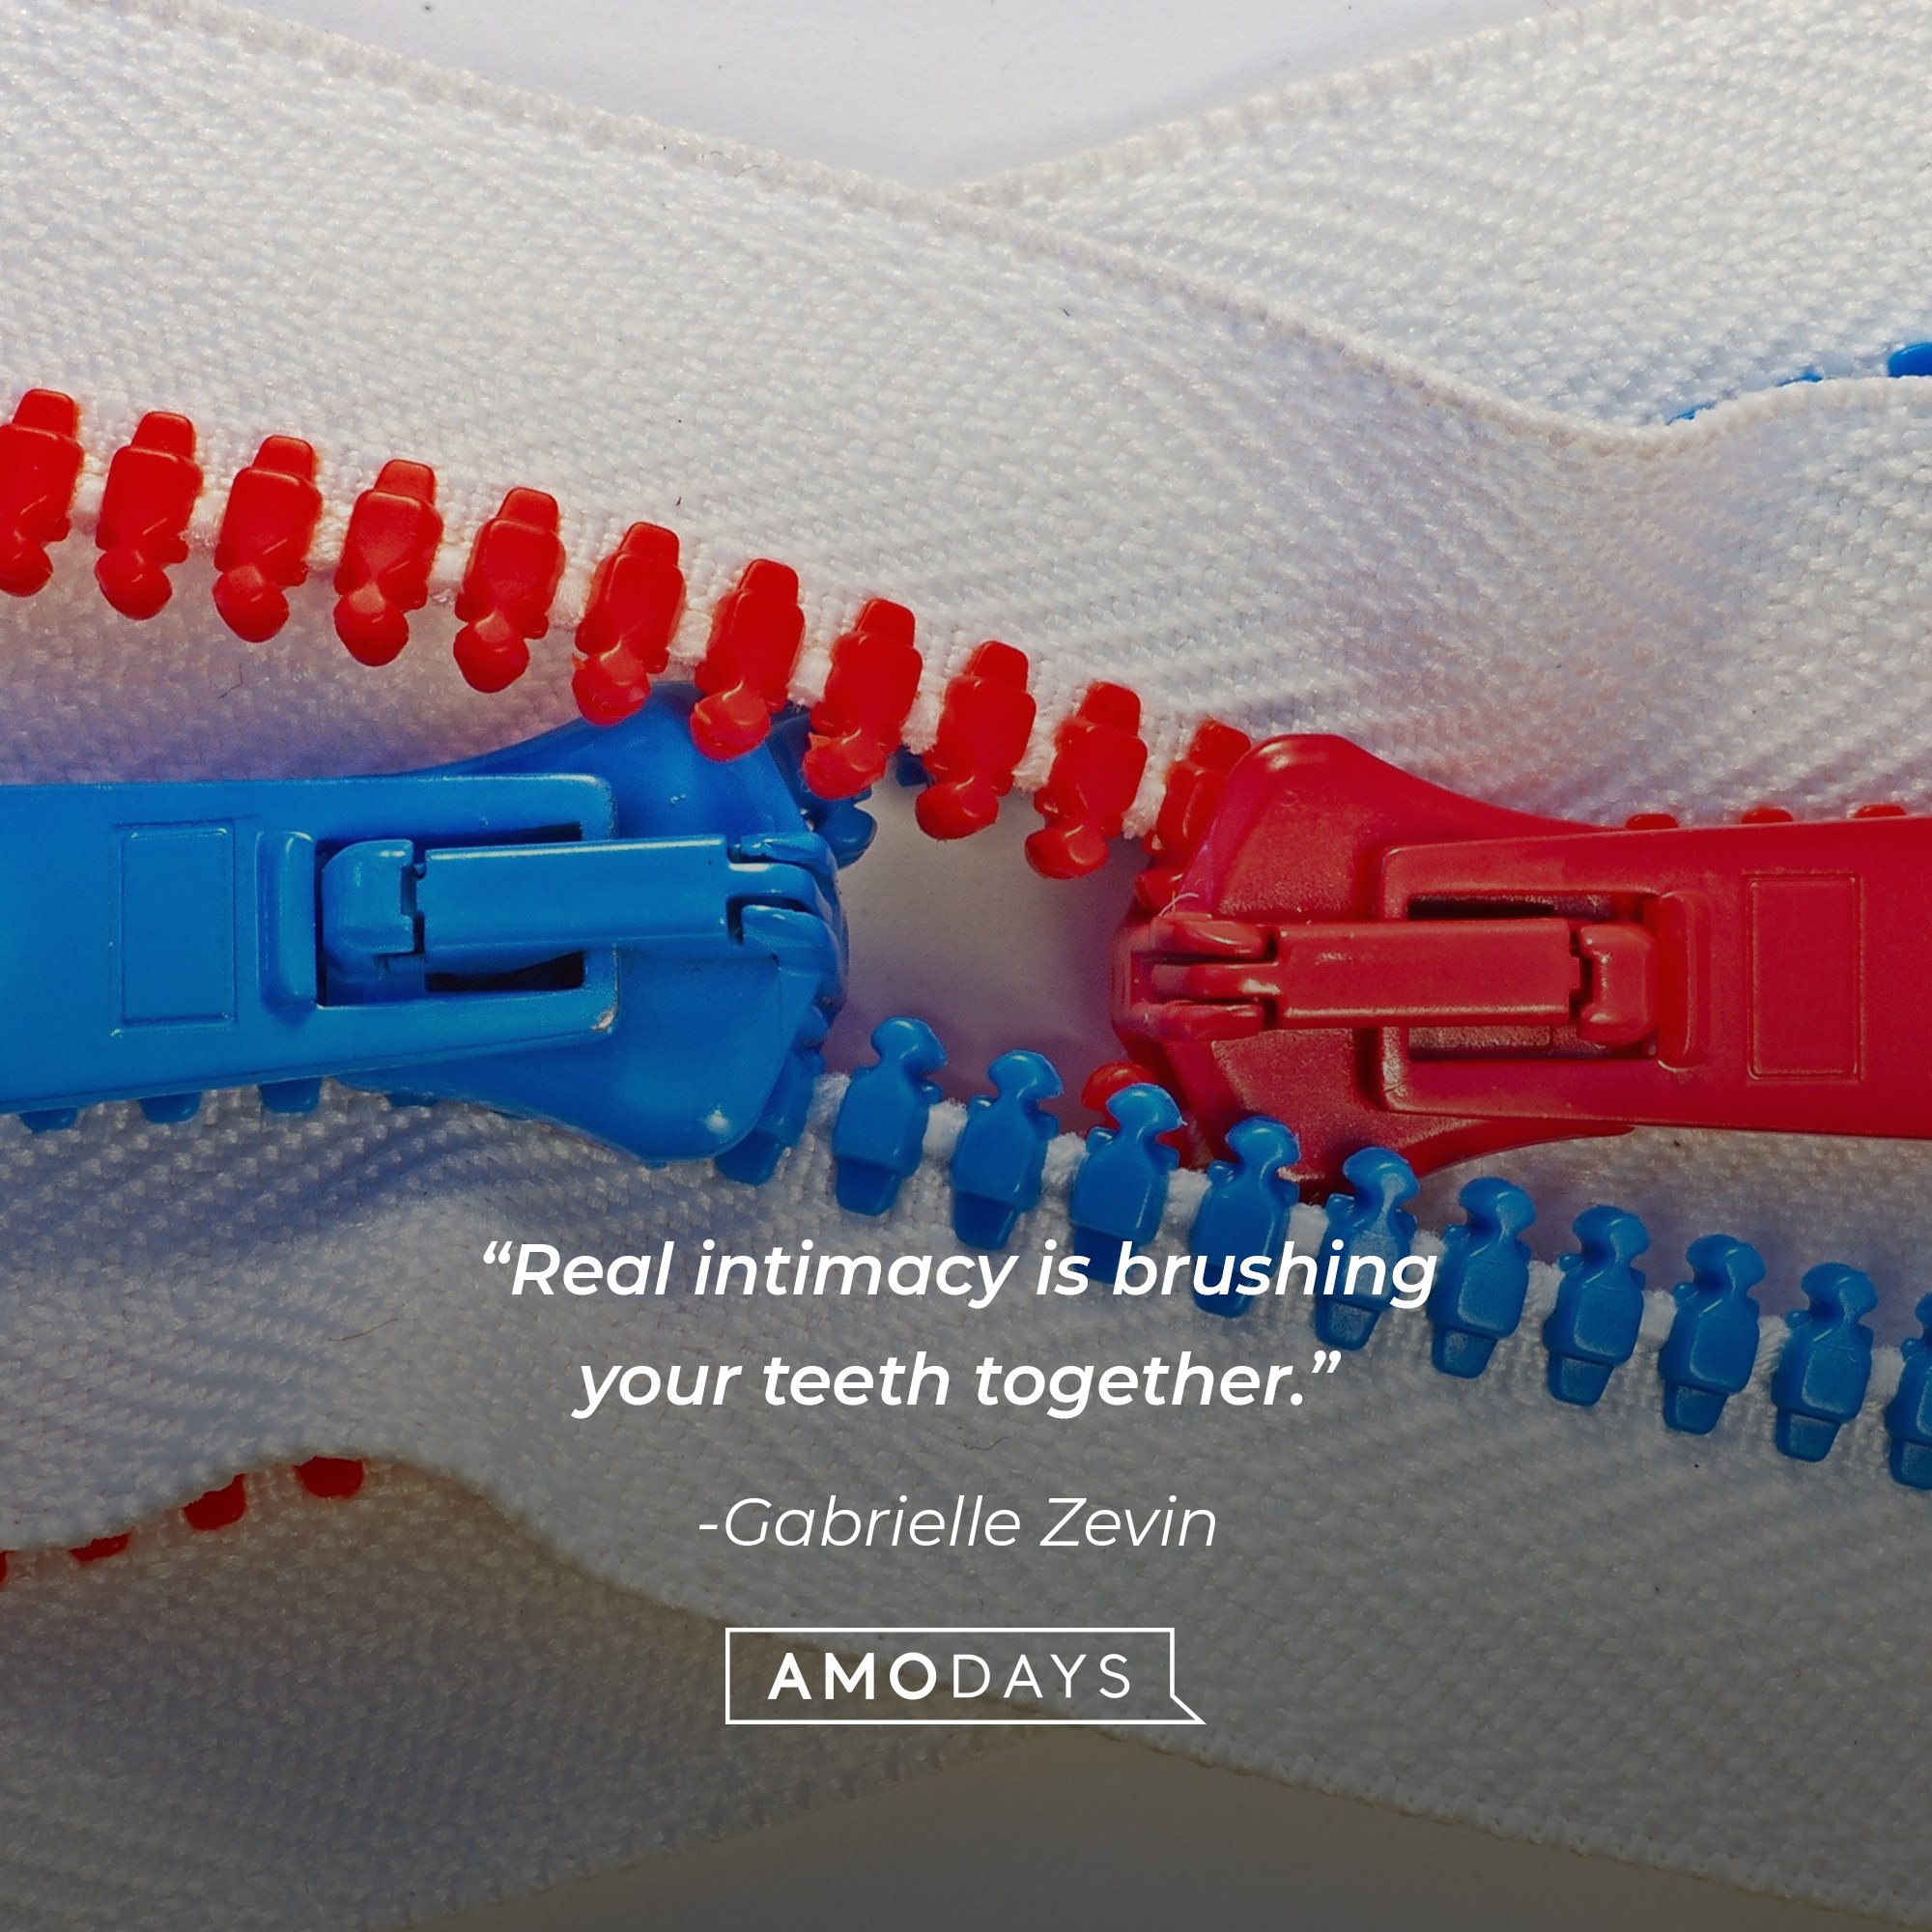 Gabrielle Zevin's quote: "Real intimacy is brushing your teeth together." | Image: AmoDays